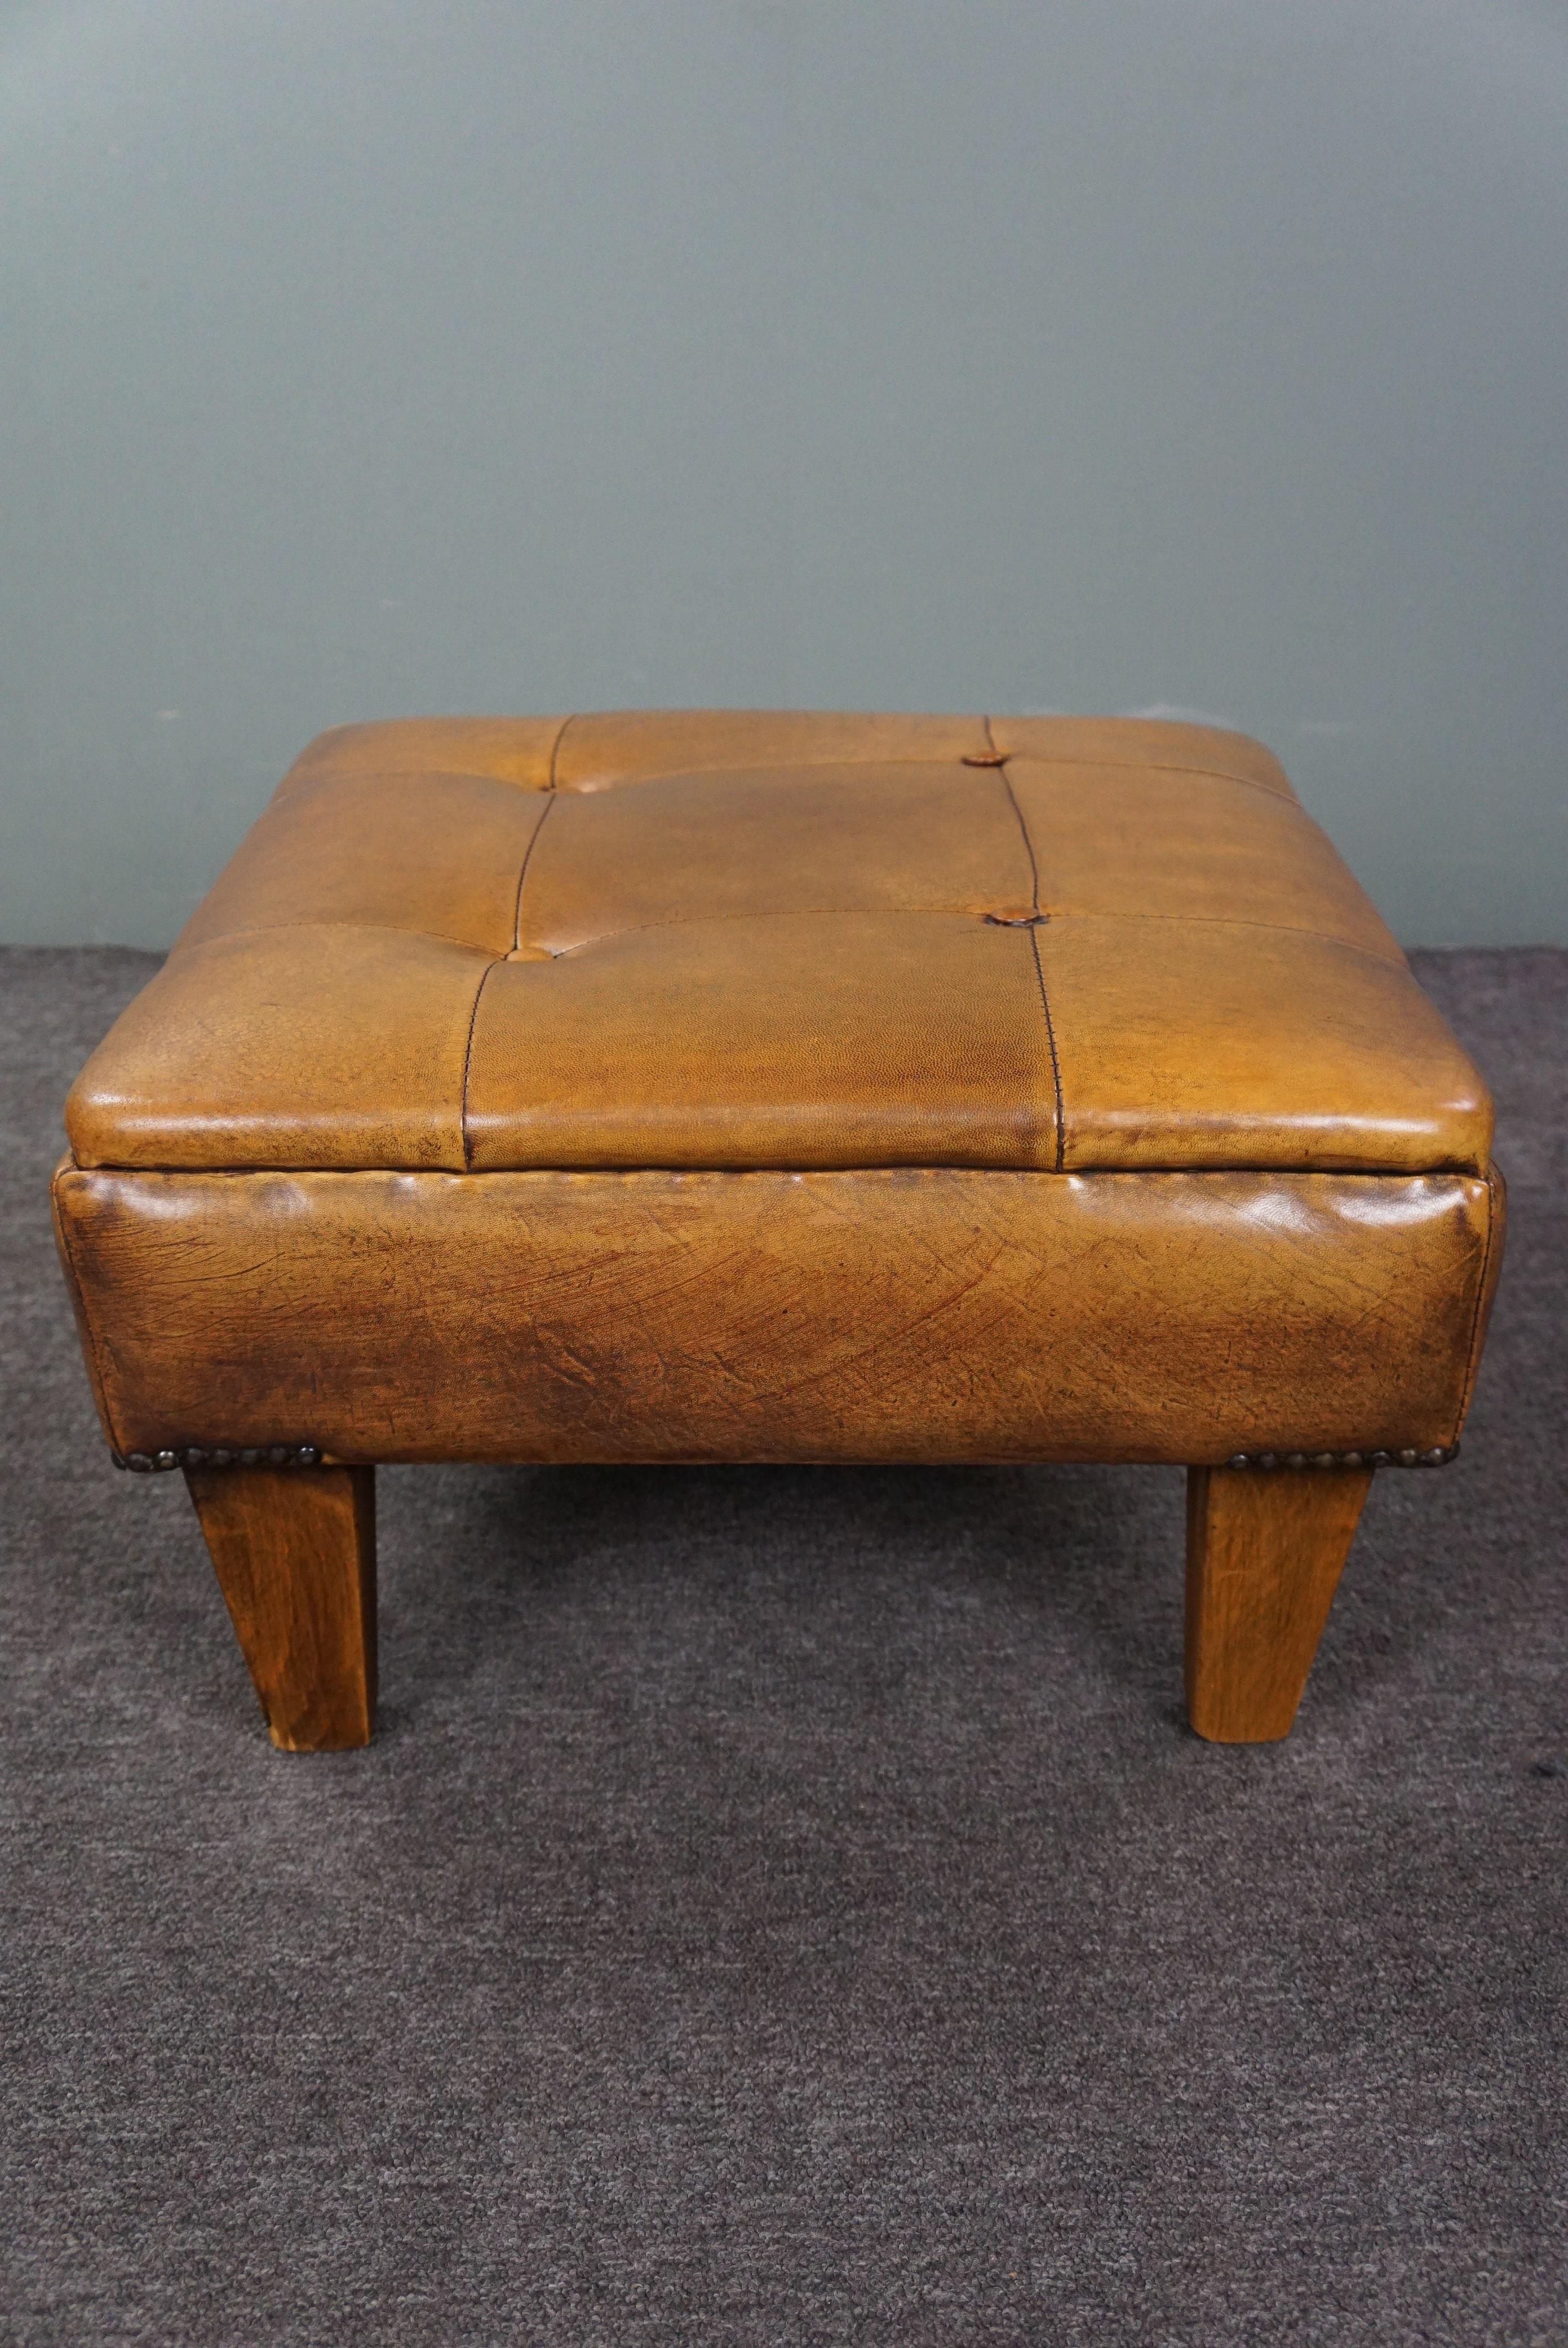 Robust button-tufted sheepskin leather ottoman In Fair Condition For Sale In Harderwijk, NL